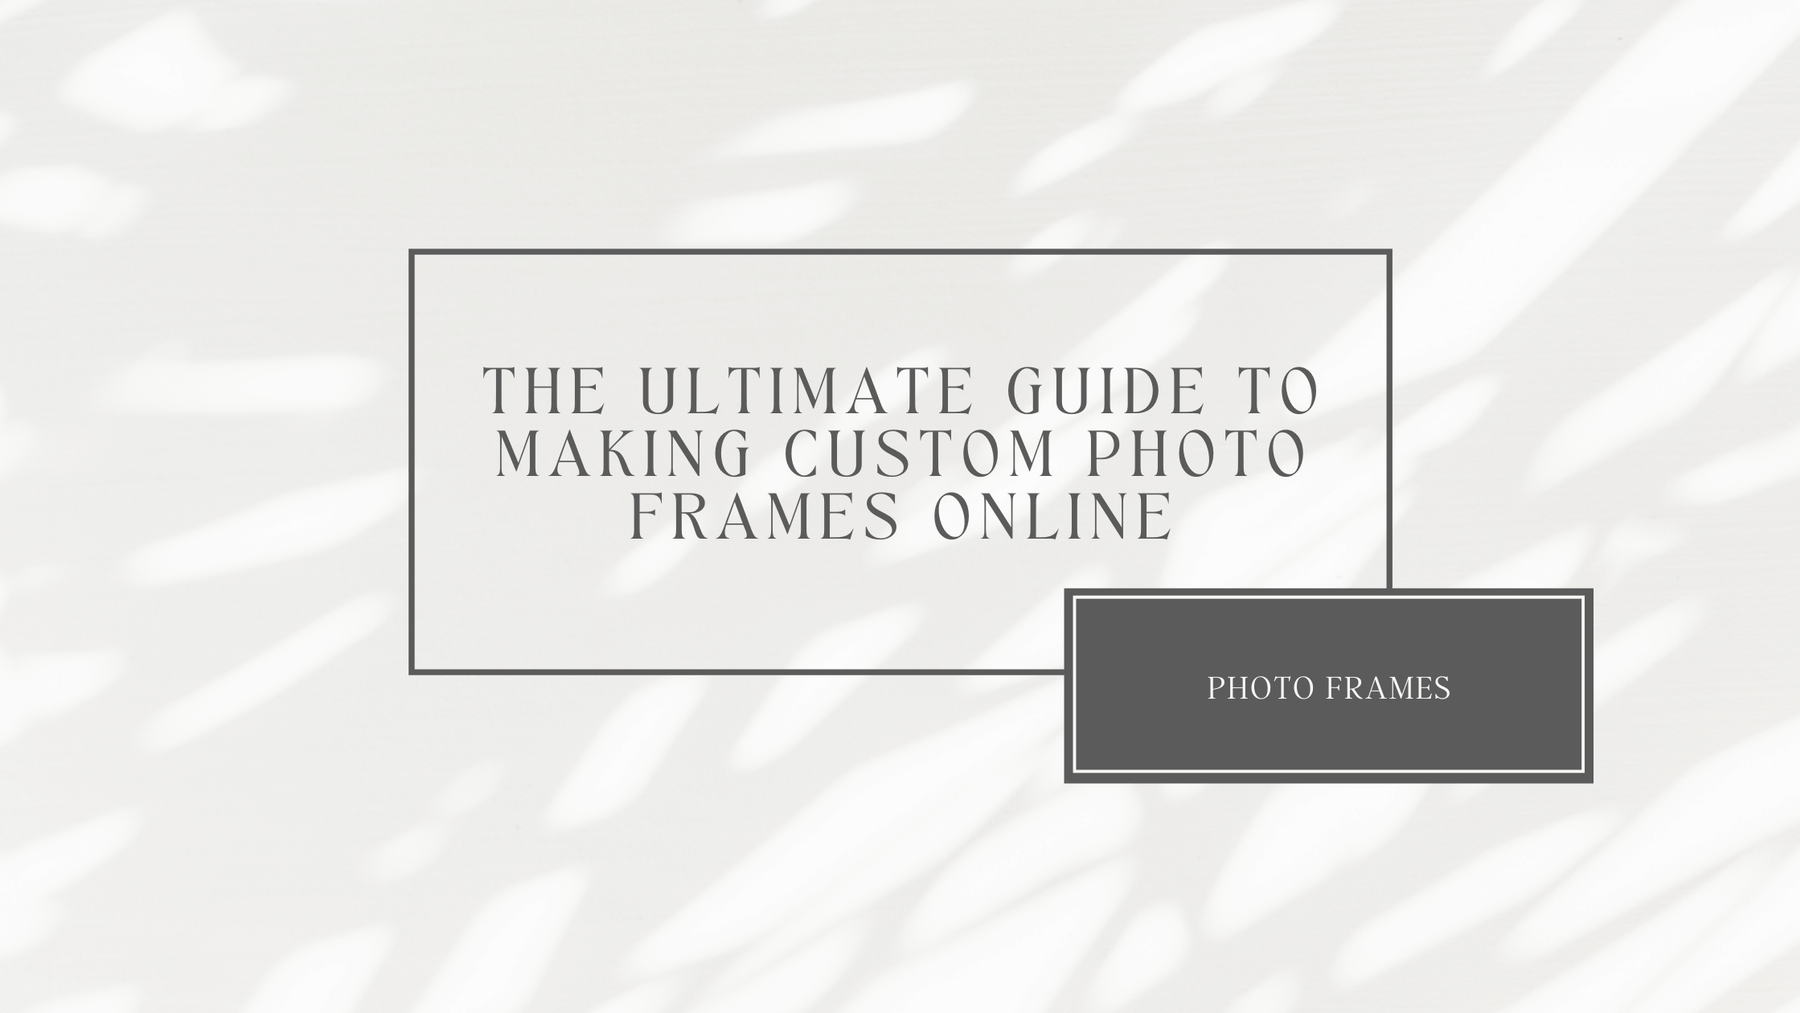 The Ultimate Guide to Making Custom Photo Frames Online